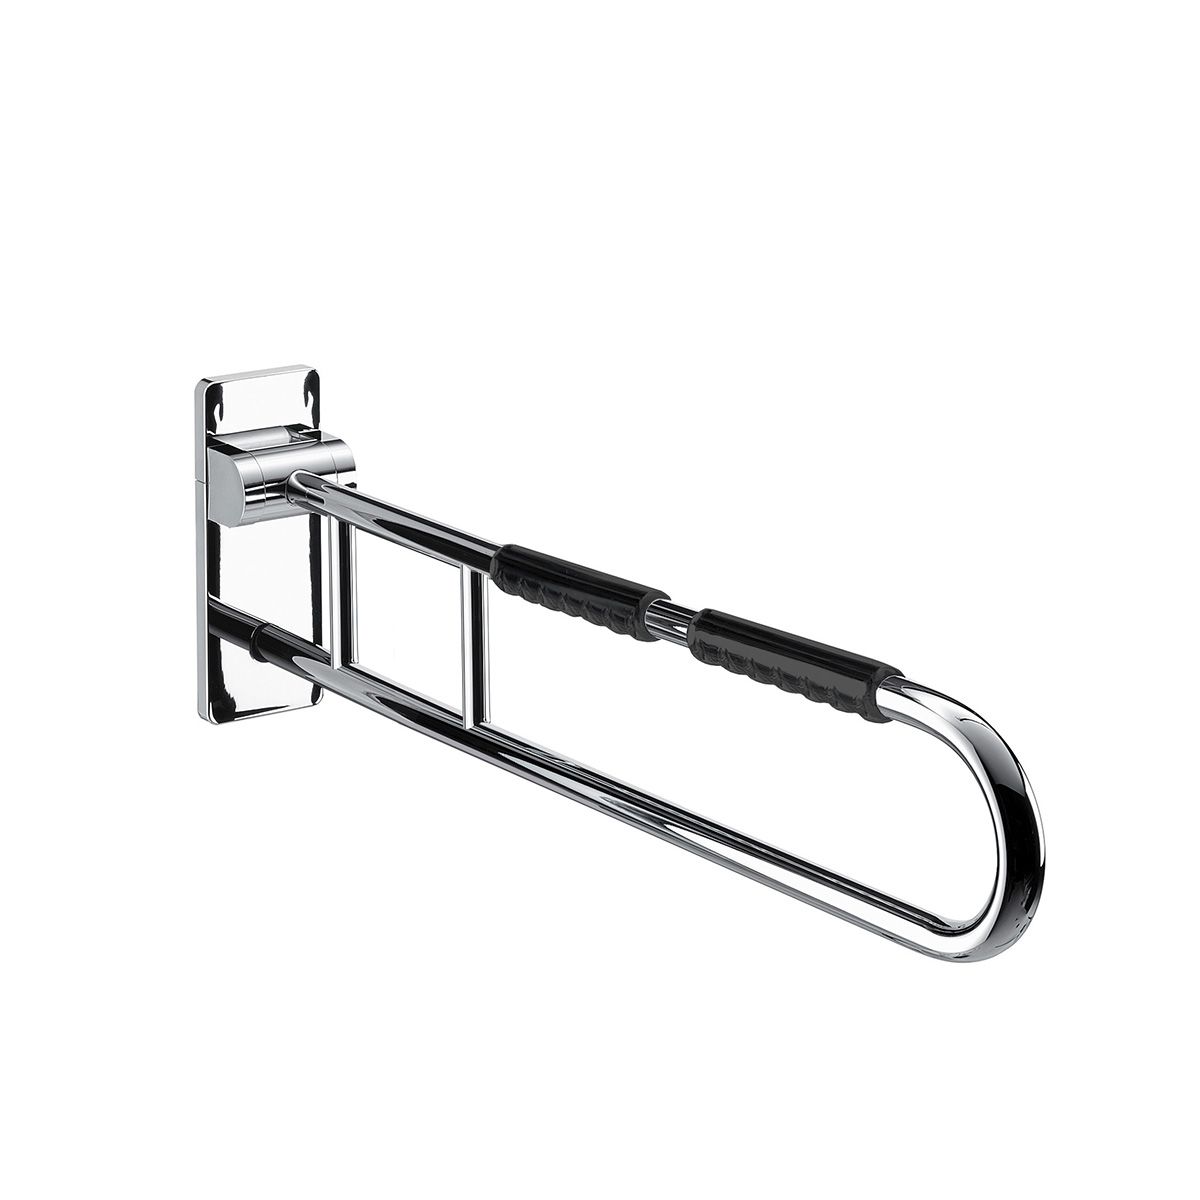 Why Grab Bars Should Be Used in a Shower